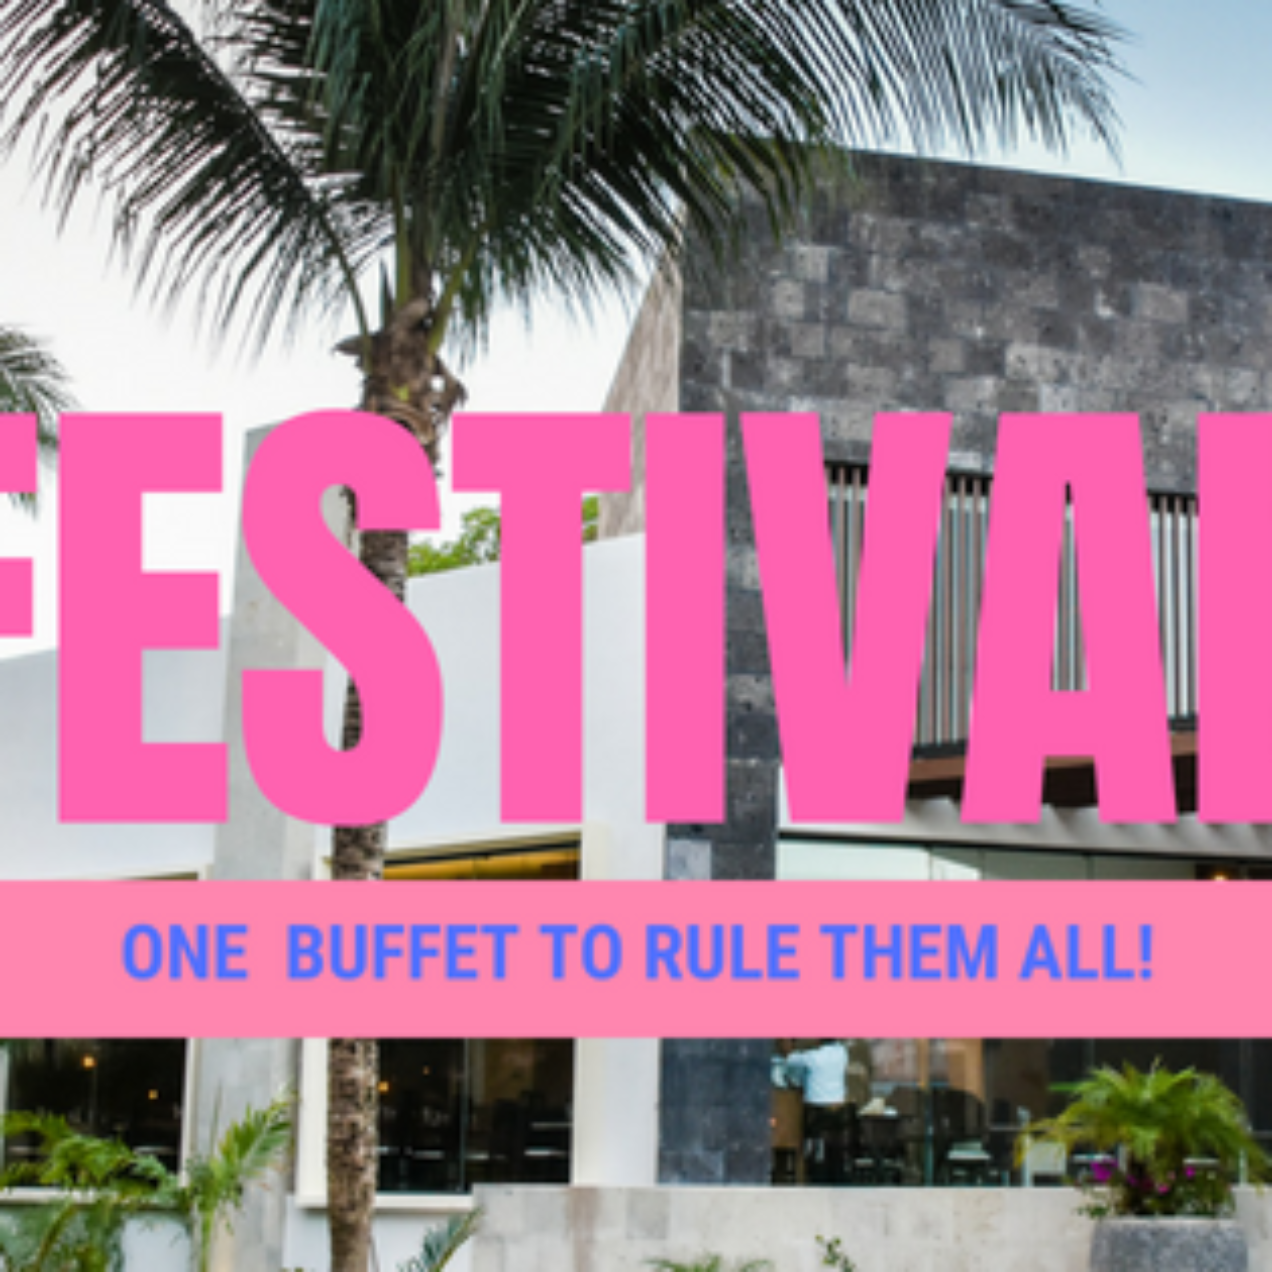 One Buffet to Rule Them All: Festival